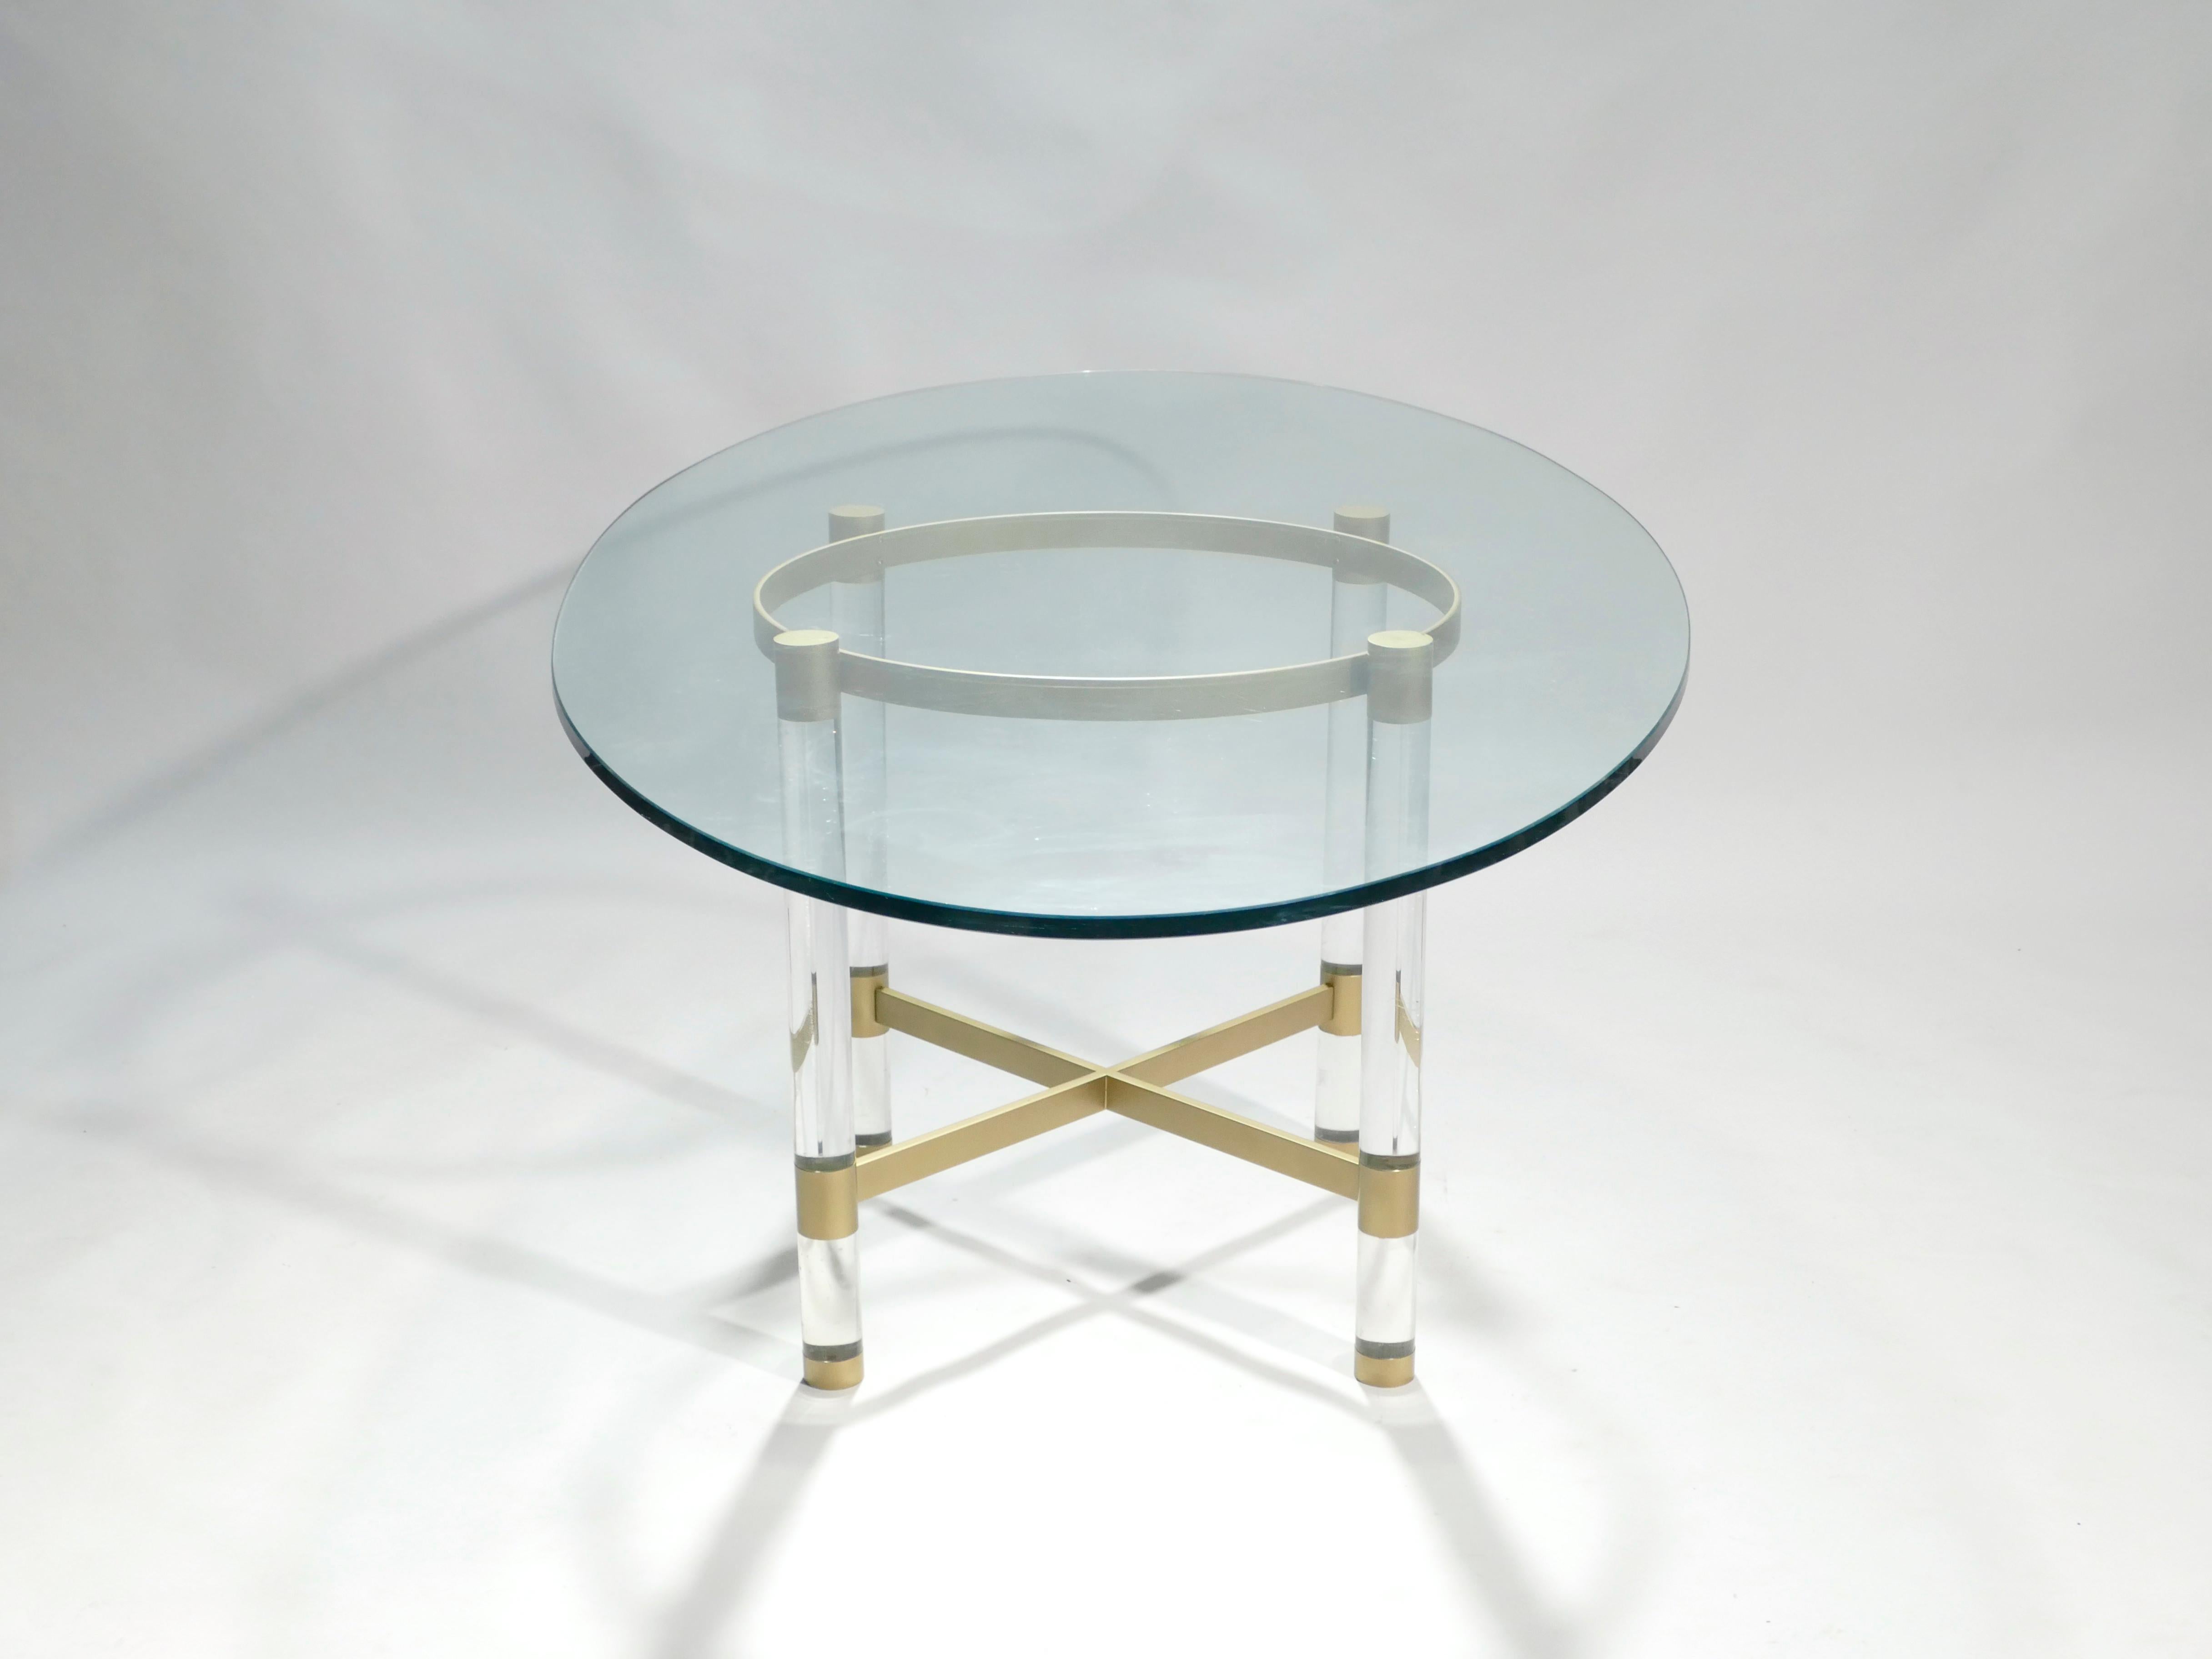 Late 20th Century Brass and Lucite Dining Table by Sandro Petti for Metalarte, 1970s For Sale